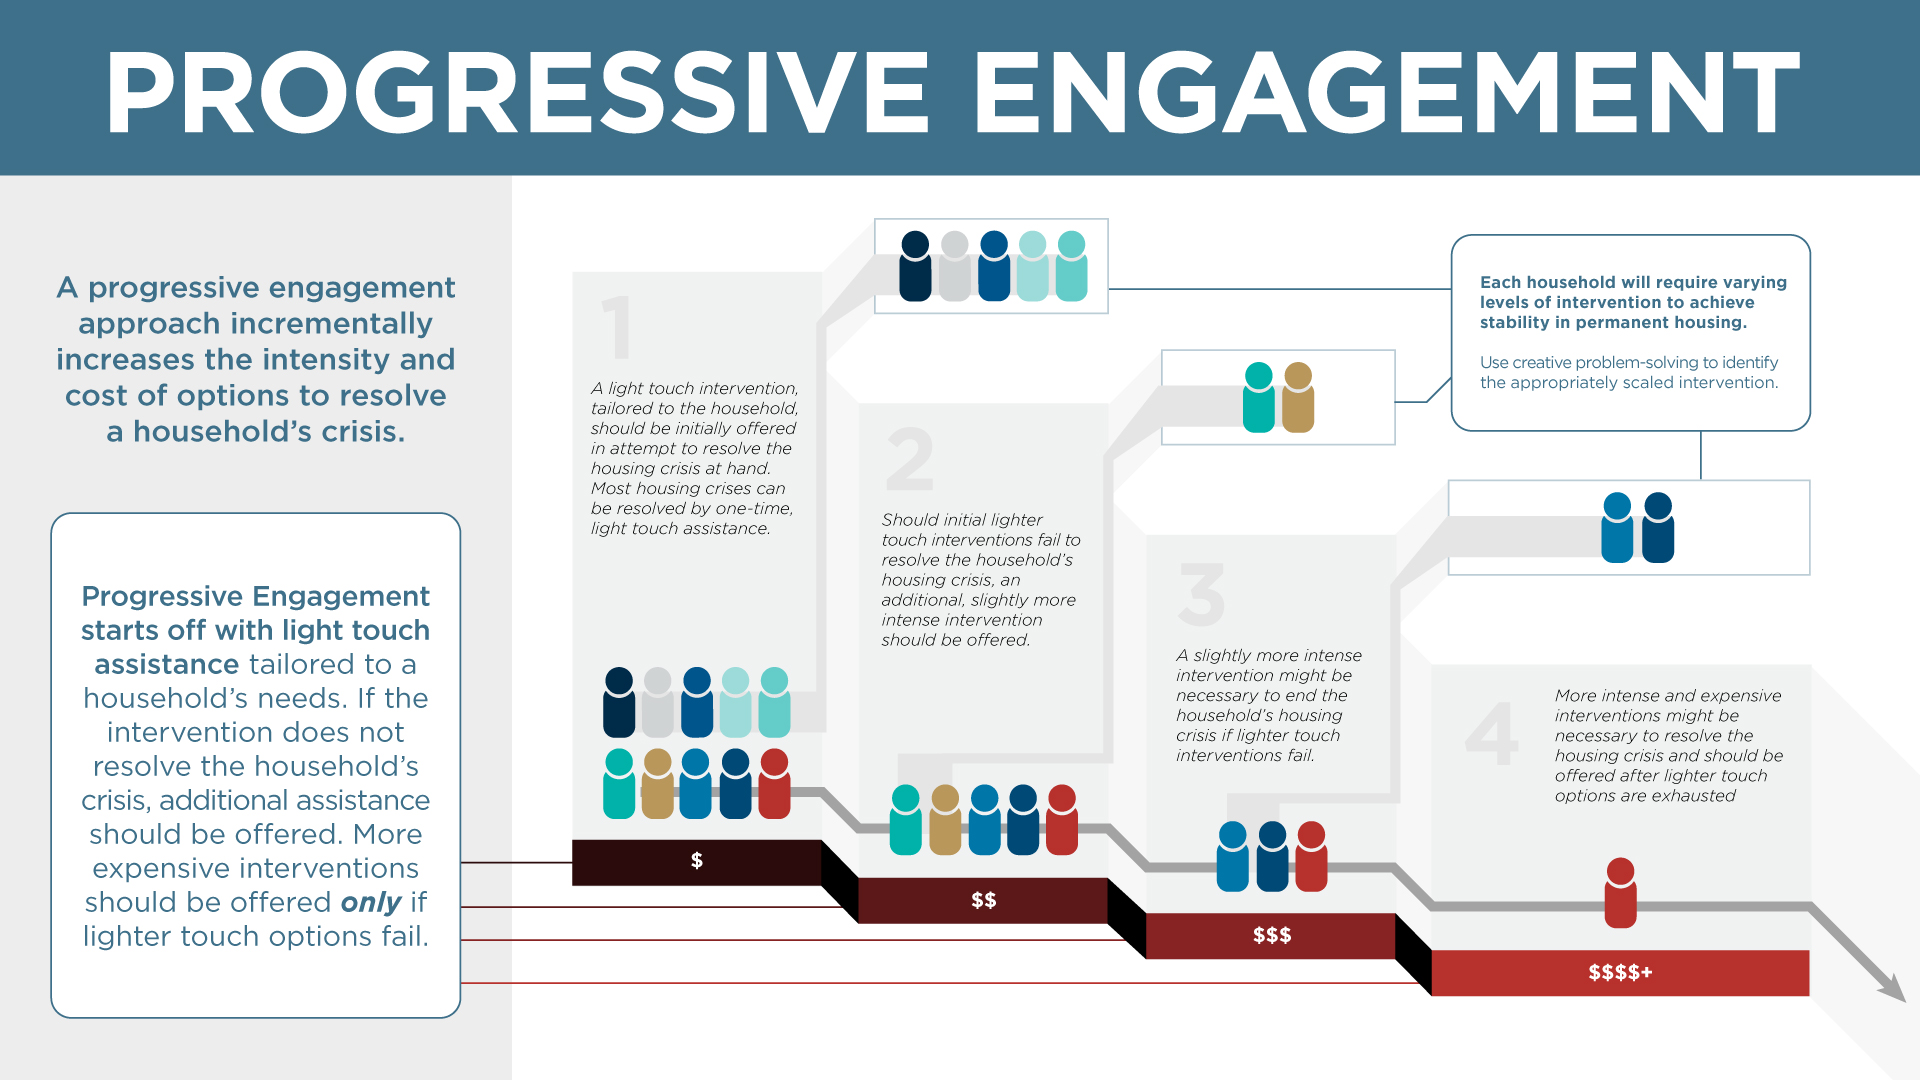 Progressive Engagement infographic. A progressive engagement approach incrementally increases the intensity and cost of options to resolve a household’s crisis. Progressive Engagement starts off with light touch assistance tailored to a household’s needs. If the intervention does not resolve the household’s crisis, additional assistance should be offered. More expensive interventions should be offered only if lighter touch options fail. Each household will require varying levels of intervention to achieve stability in permanent housing. Use creative problem-solving to identify the appropriately scaled intervention. 1) A light touch intervention, tailored to the household, should be initially offered in attempt to resolve the housing crisis at hand. Most housing crises can be resolved by one-time, light touch assistance. 2) Should initial lighter touch interventions fail to resolve the household’s housing crisis, an additional, slightly more intense intervention should be offered. 3) A slightly more intense intervention might be necessary to end the household’s housing crisis if lighter touch interventions fail. 4) More intense and expensive interventions might be necessary to resolve the housing crisis and should be offered after lighter touch options are exhausted.